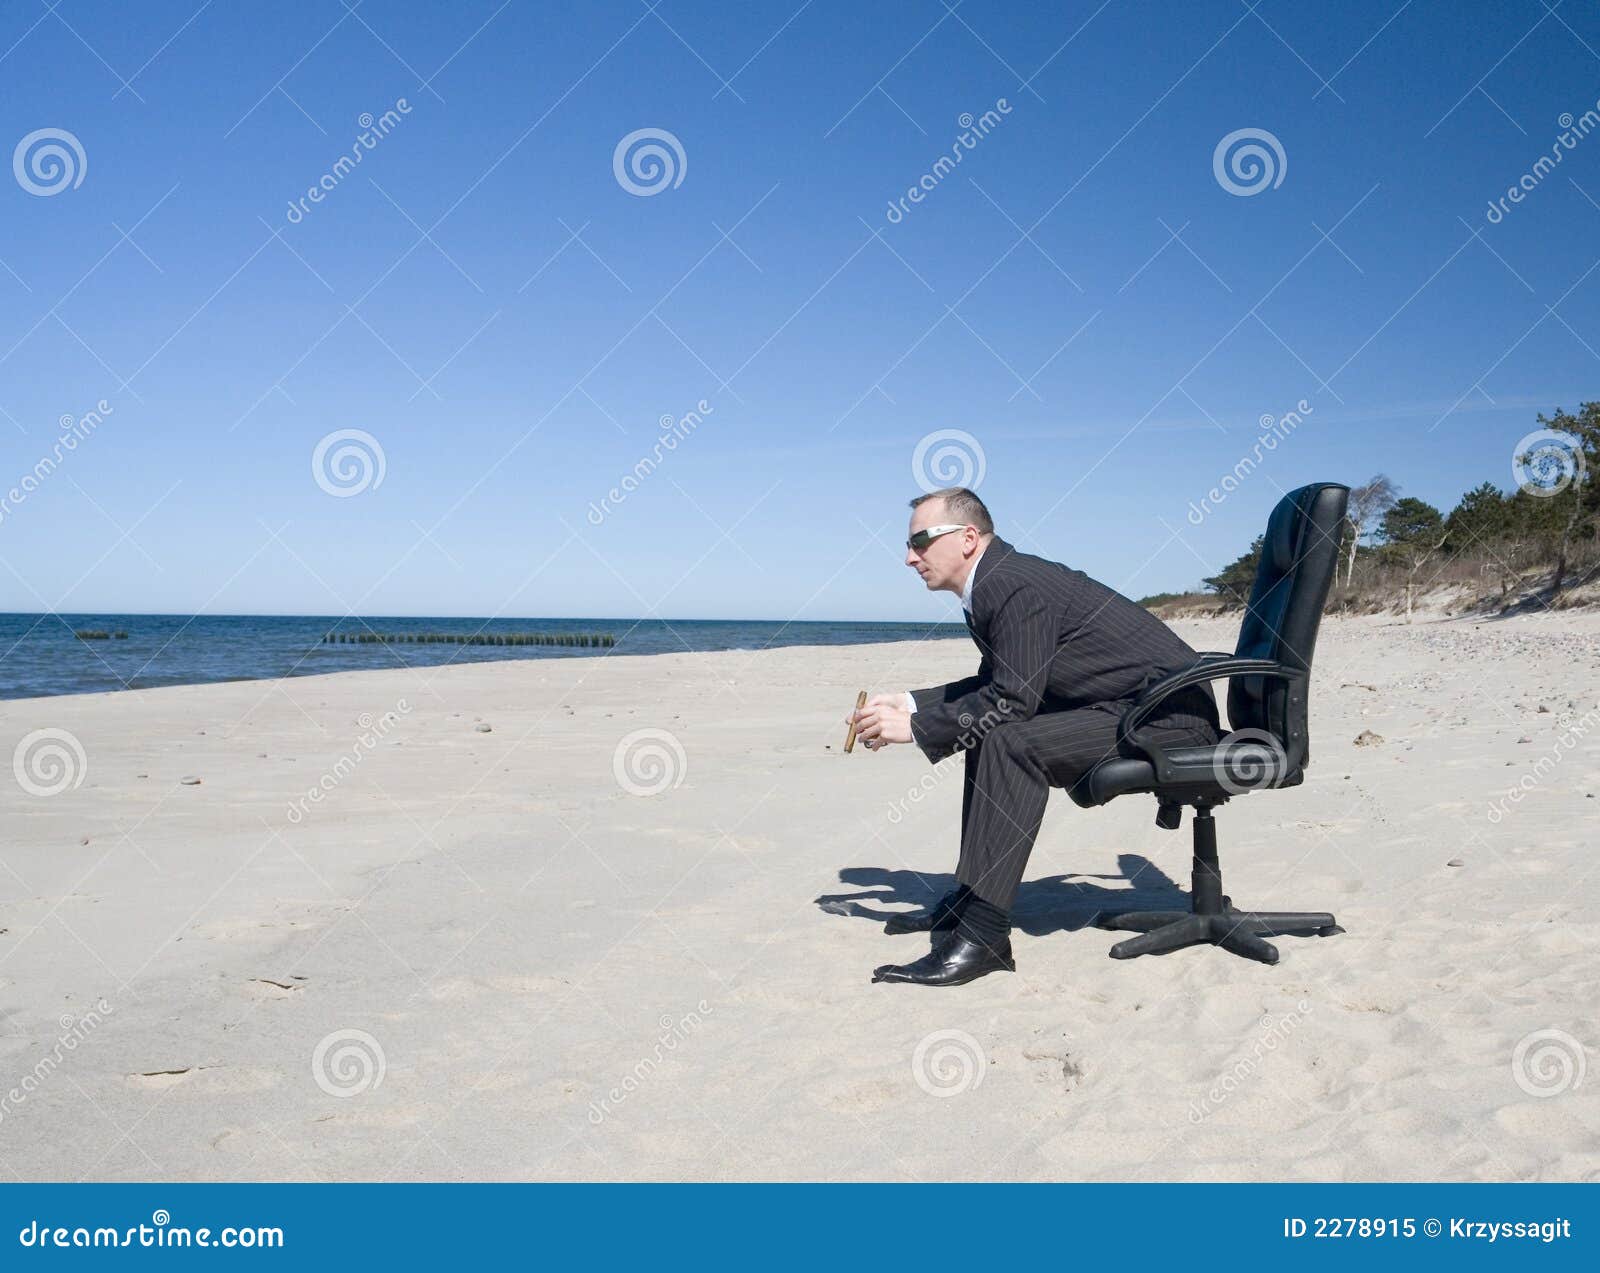 Man on Beach stock image. Image of adult, water, attire - 2278915